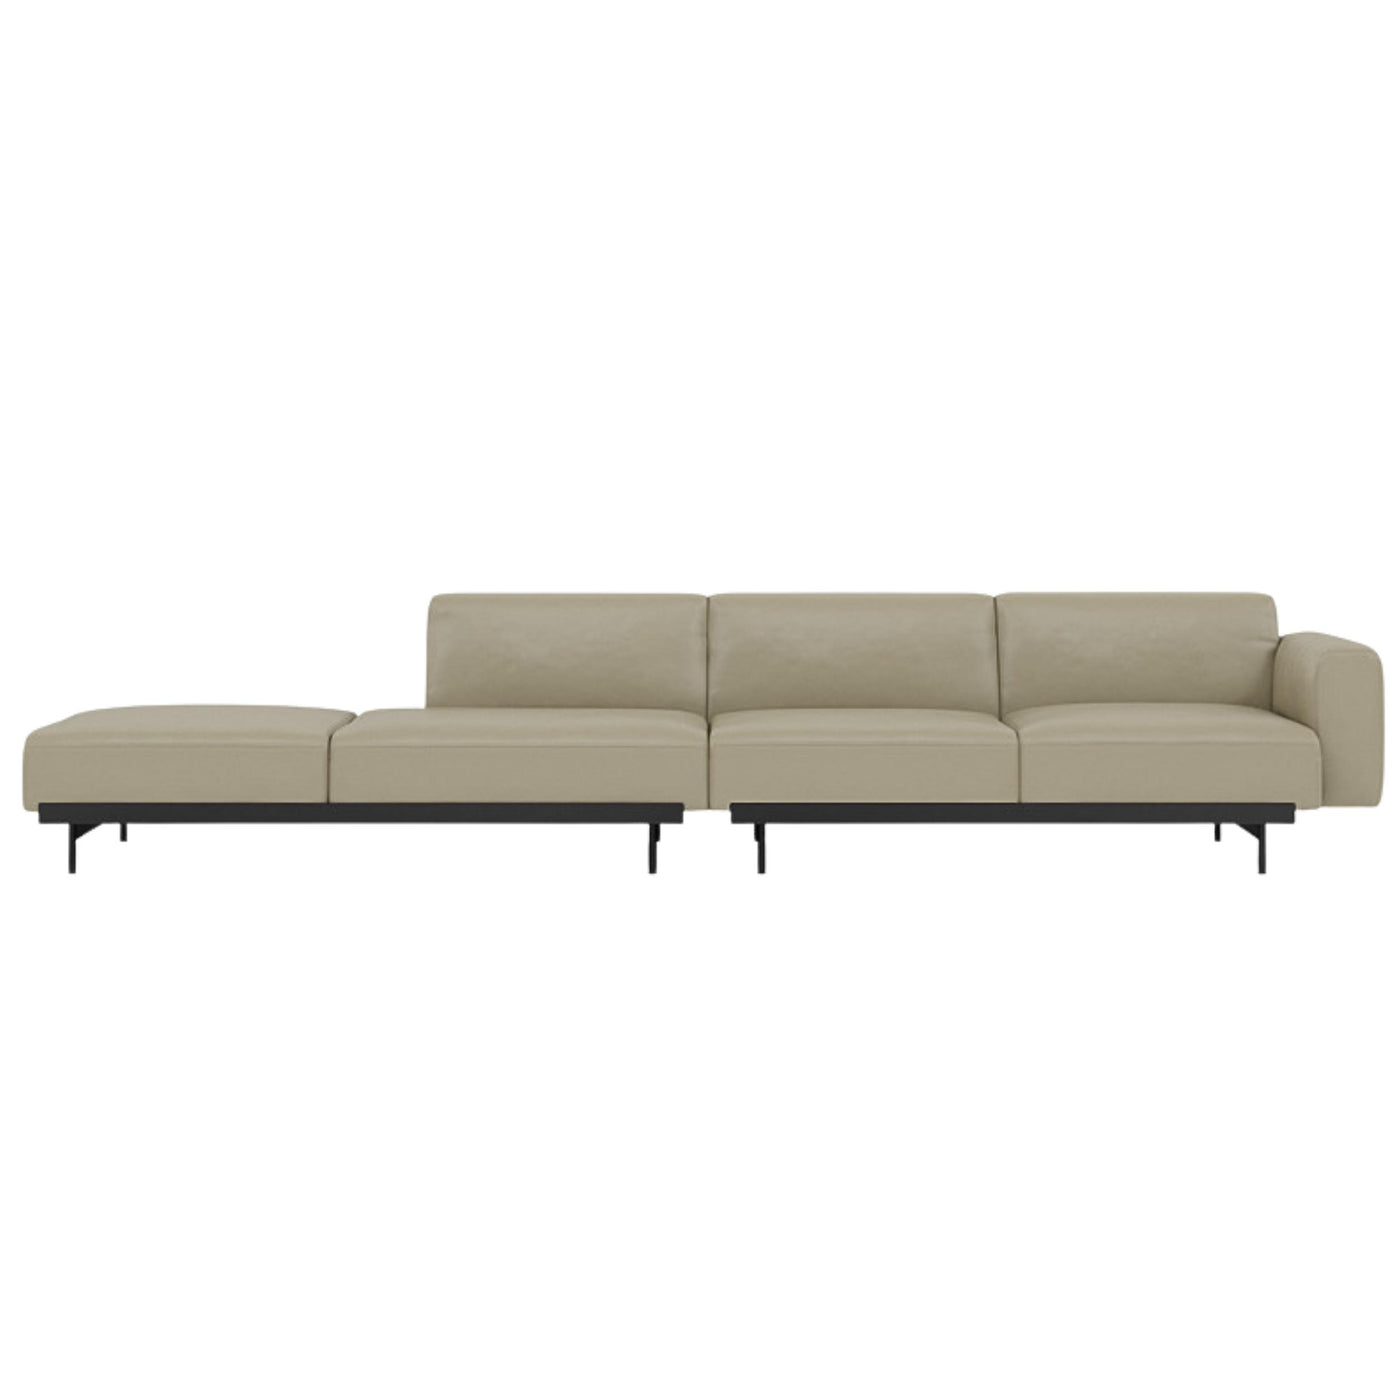 Muuto In Situ Modular 4 Seater Sofa configuration 3. Made to order from someday designs. #colour_stone-refine-leather